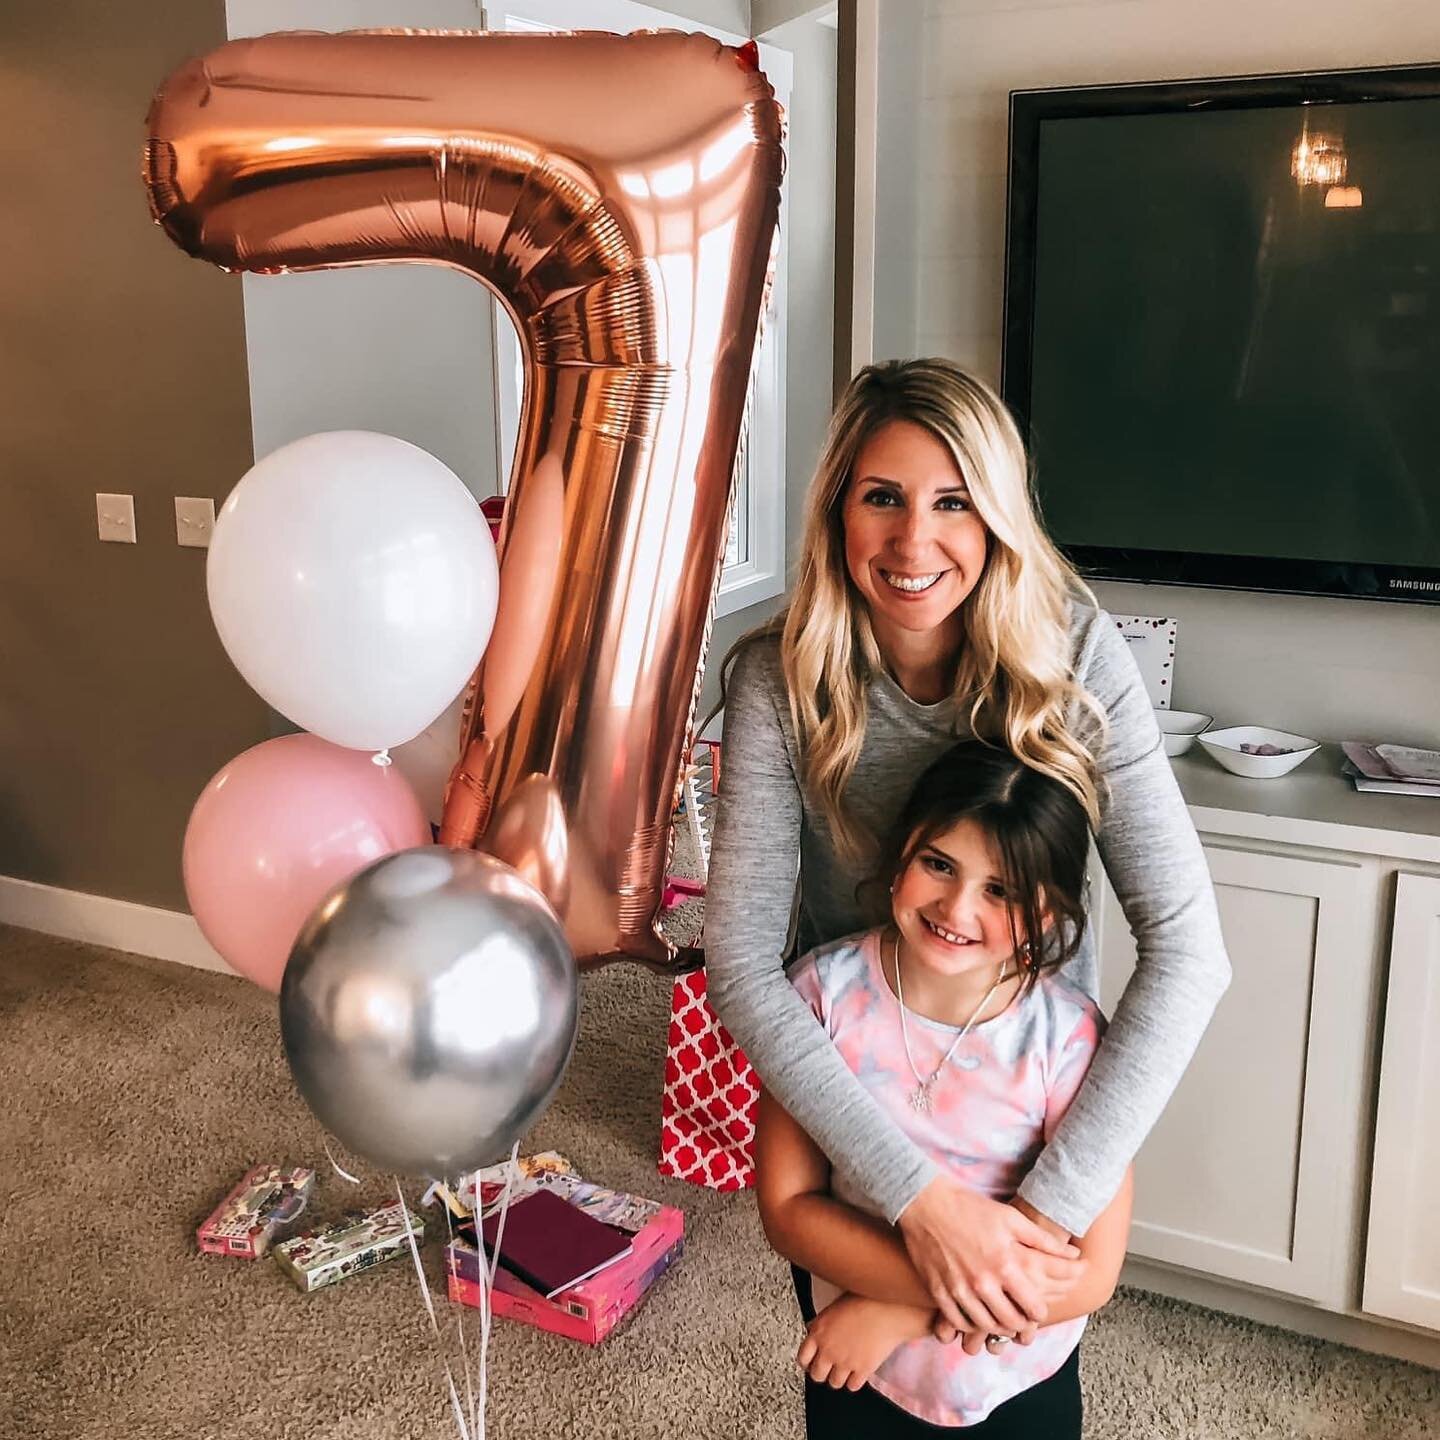 S E V E N. 🎉 

We were busy celebrating Sloane yesterday and I never got around to making a post. But this girl is certainly worth celebrating!! She had a fun party in December, so I didn&rsquo;t bring down her day while recovering. Yesterday was a 